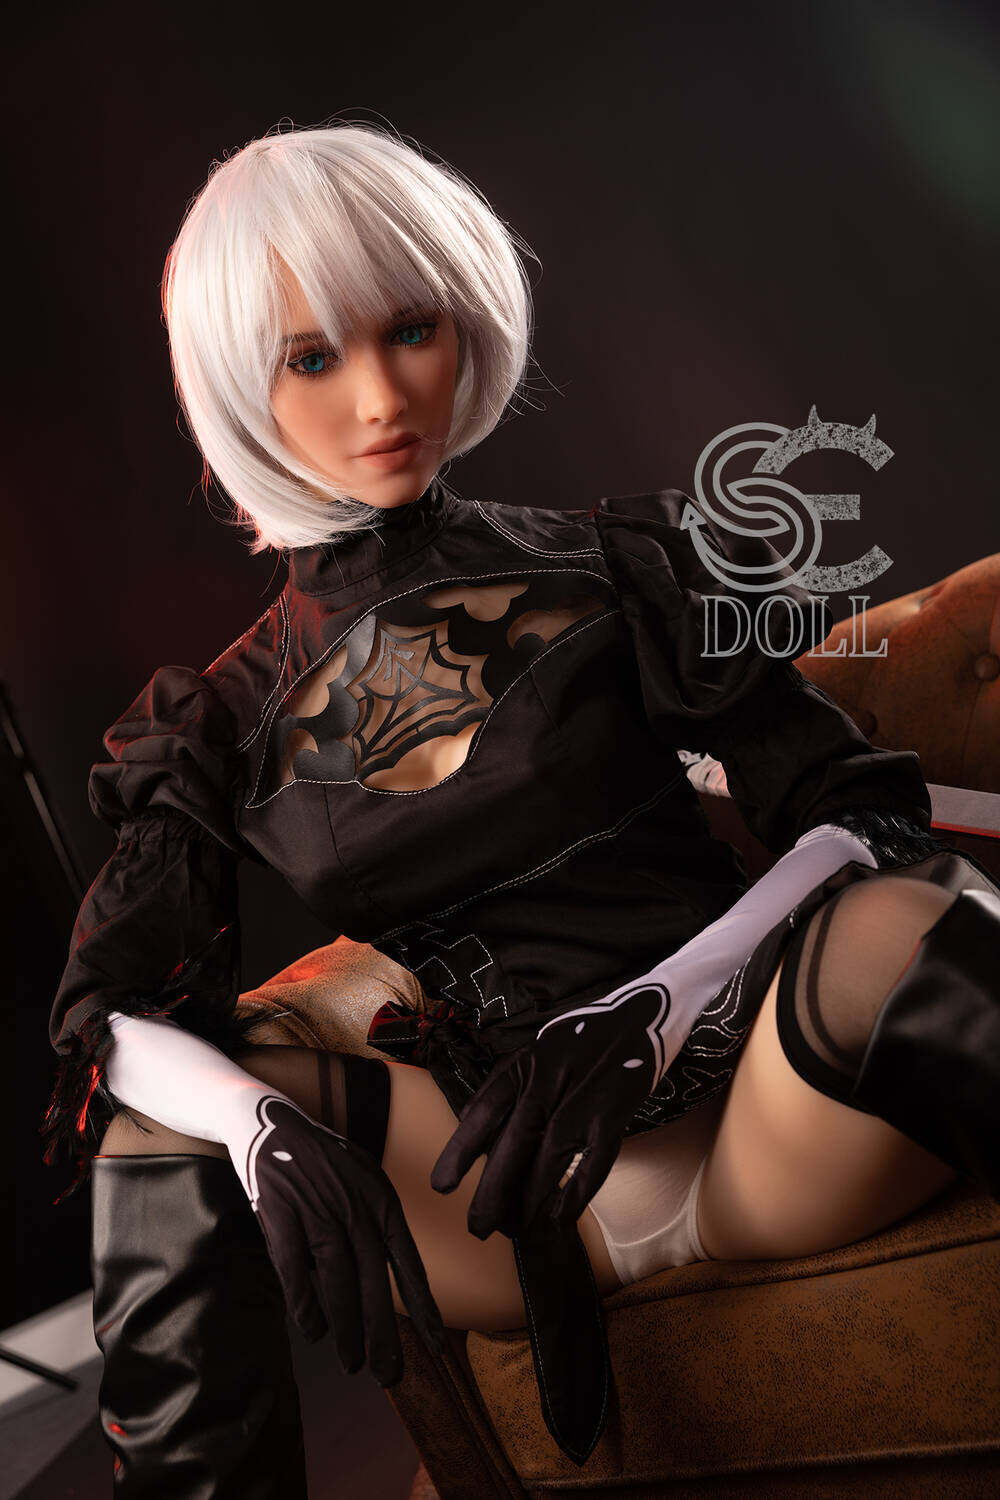 Adalyn Quirky 163cm(5ft4) E-Cup Helpful TPE SE COSPLAY SEX DOLLS Real Love Doll image6